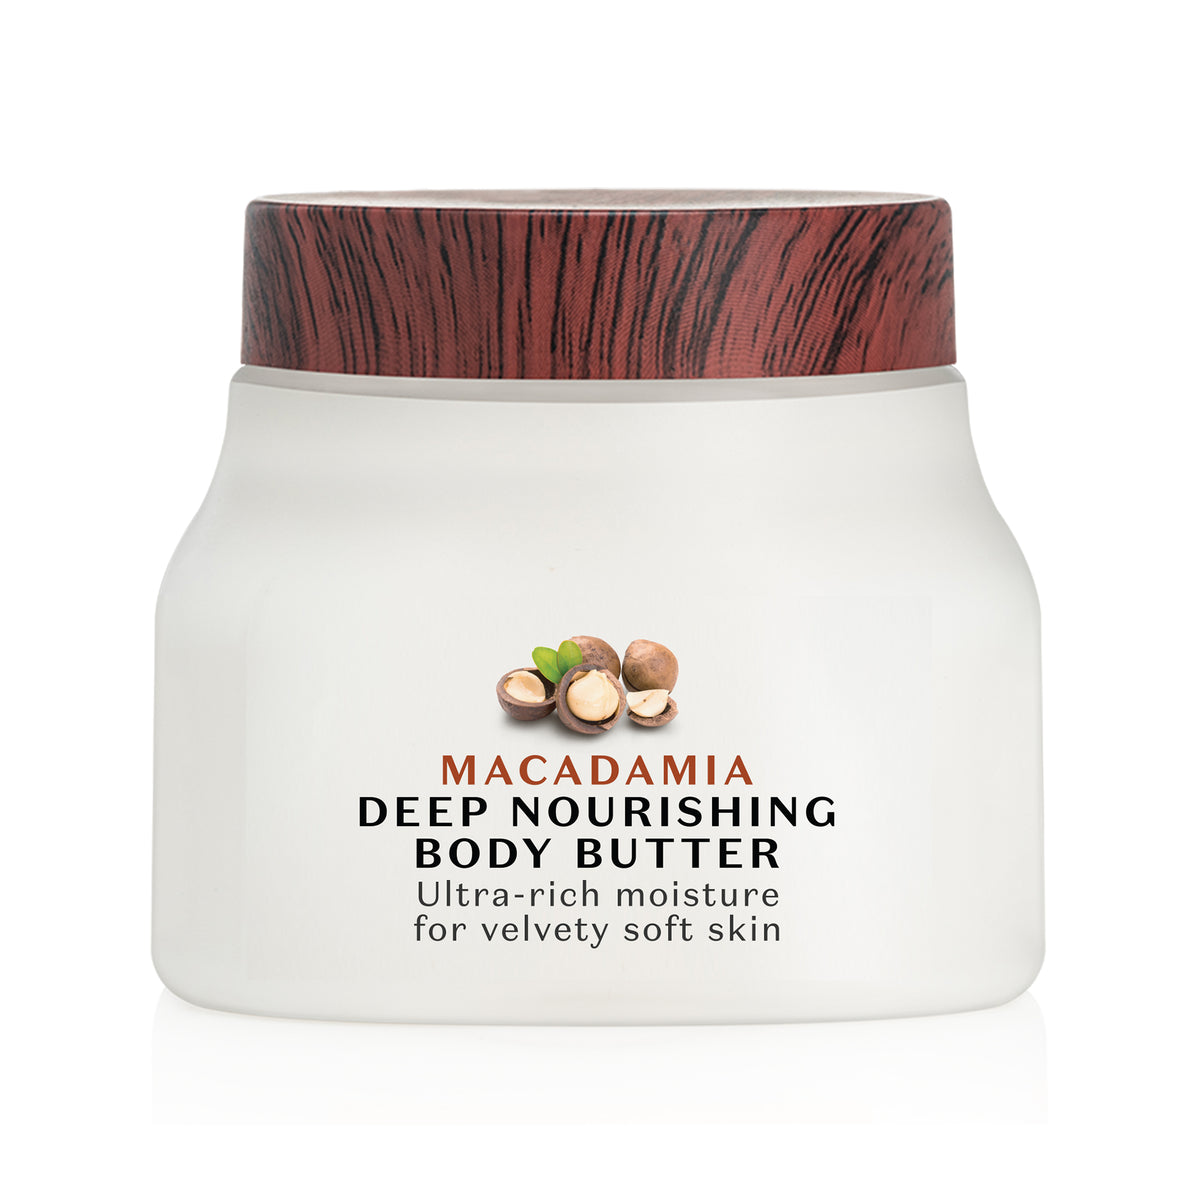 Macadamia Deep Nourishing Body Butter | From the makers of Parachute Advansed | 140 ml - PureSense